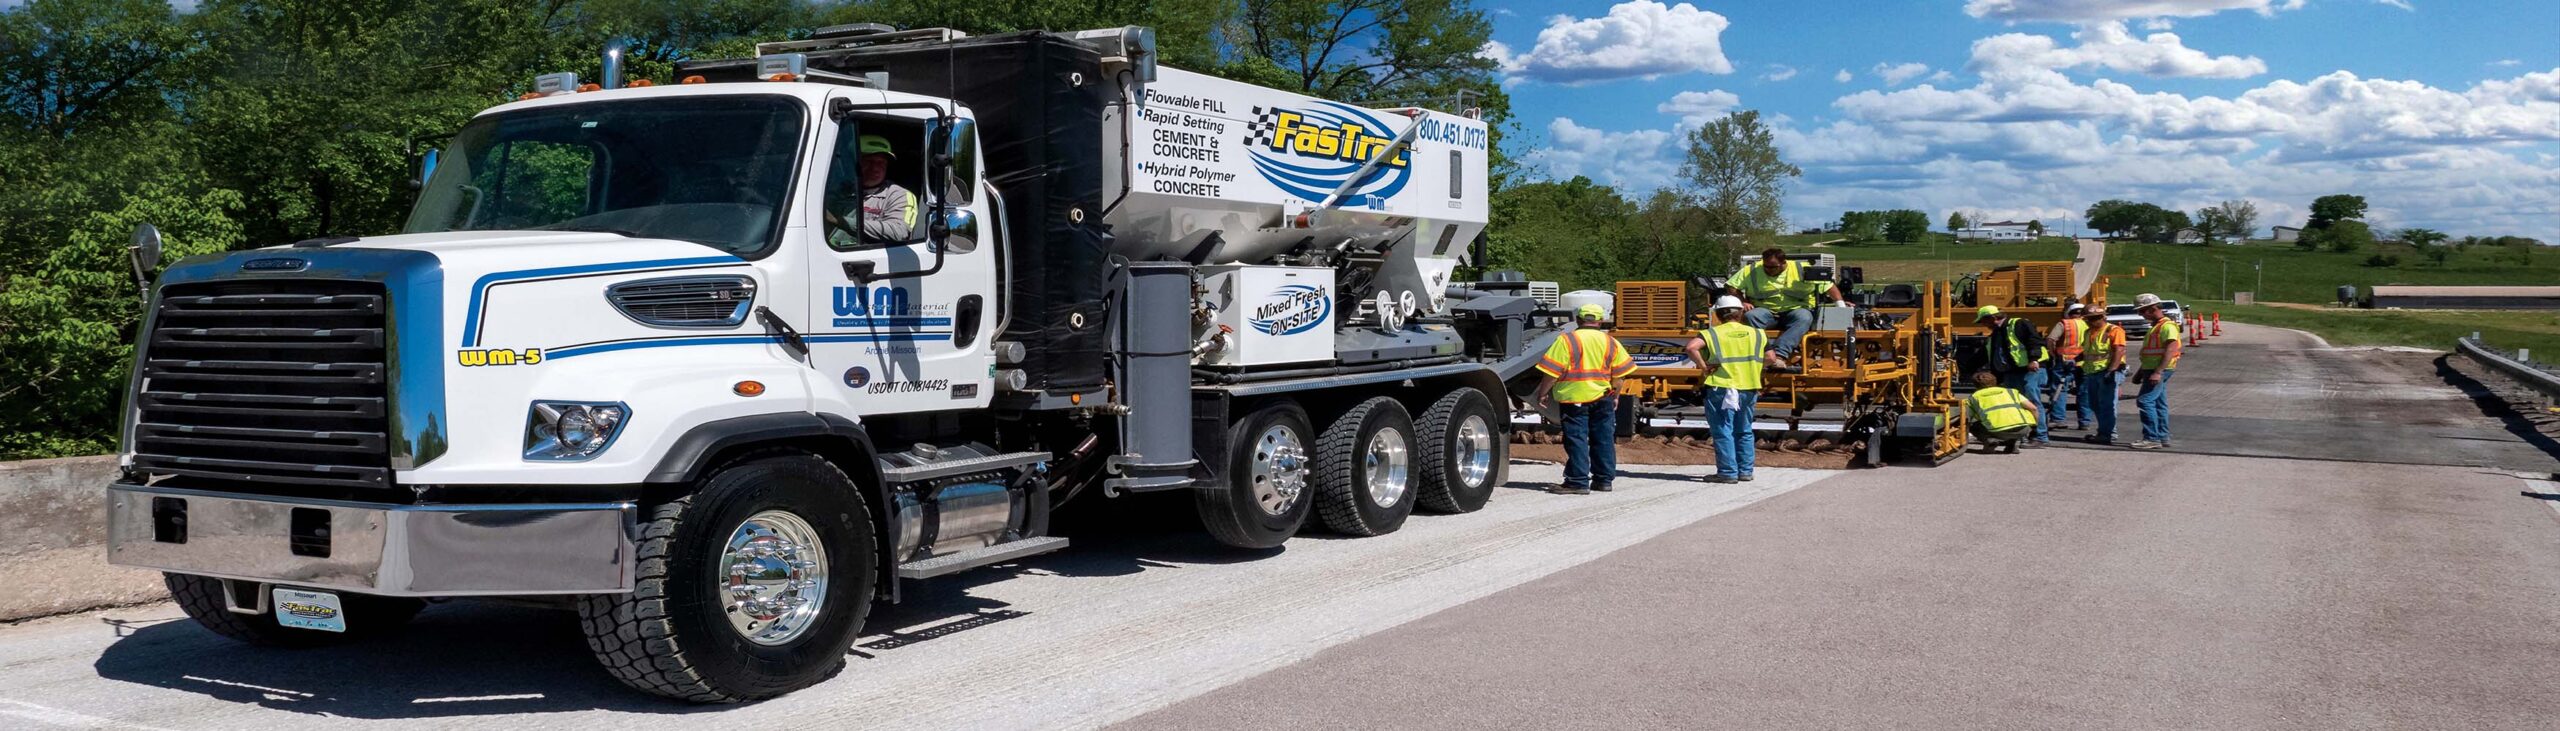 FasTrac Retarder is used on a road repair to improve workability in hot weather conditions.